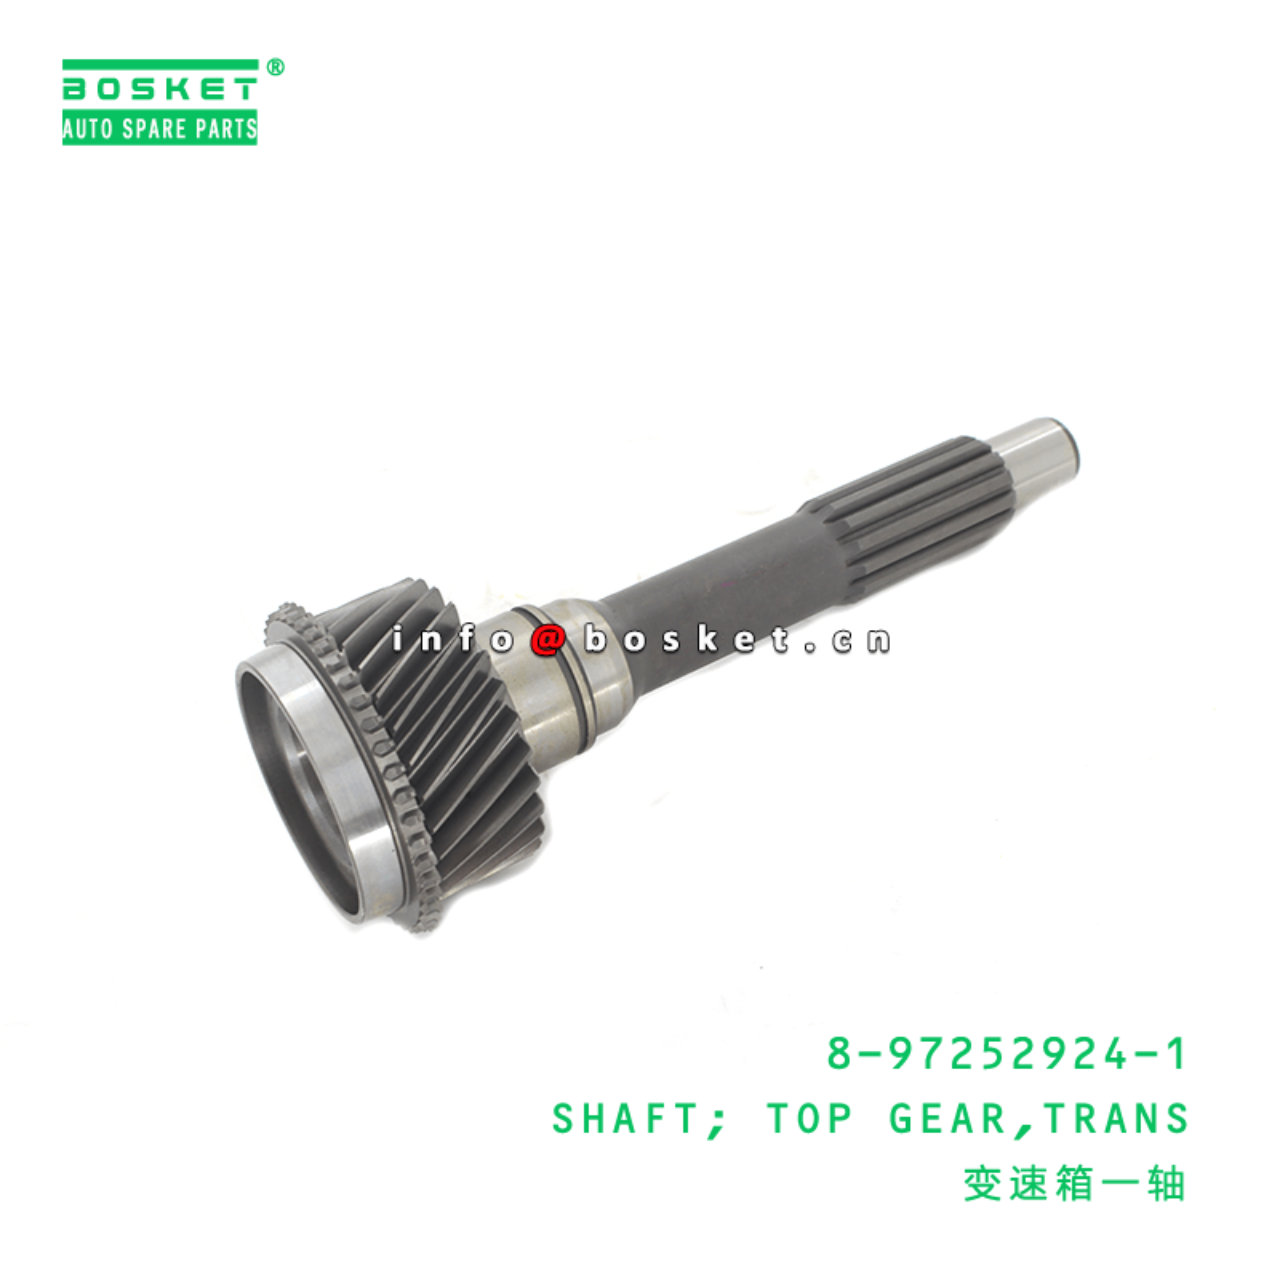 8-97252924-1 Transmission Top Gear Shaft 8972529241 Suitable for ISUZU MYY5T 4JH1